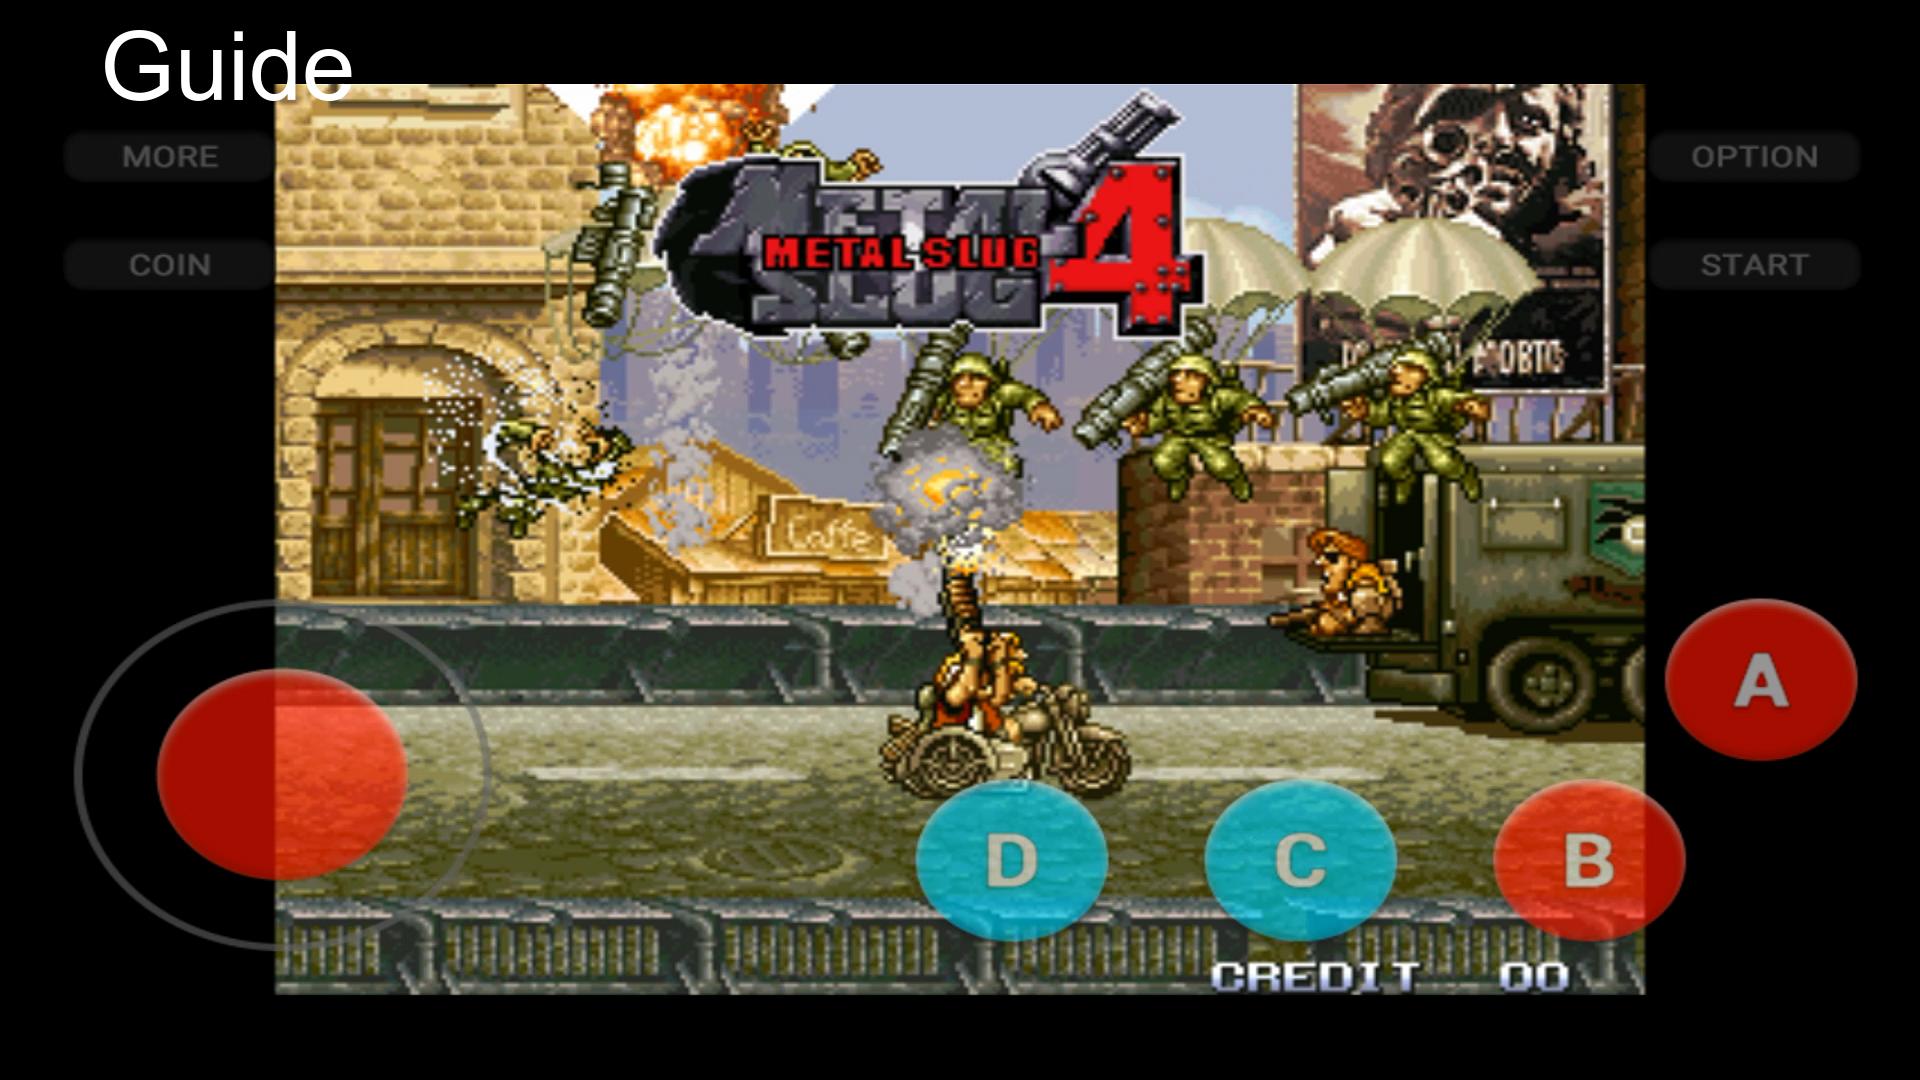 Download Guide For Metal Slug 4 Android On PC